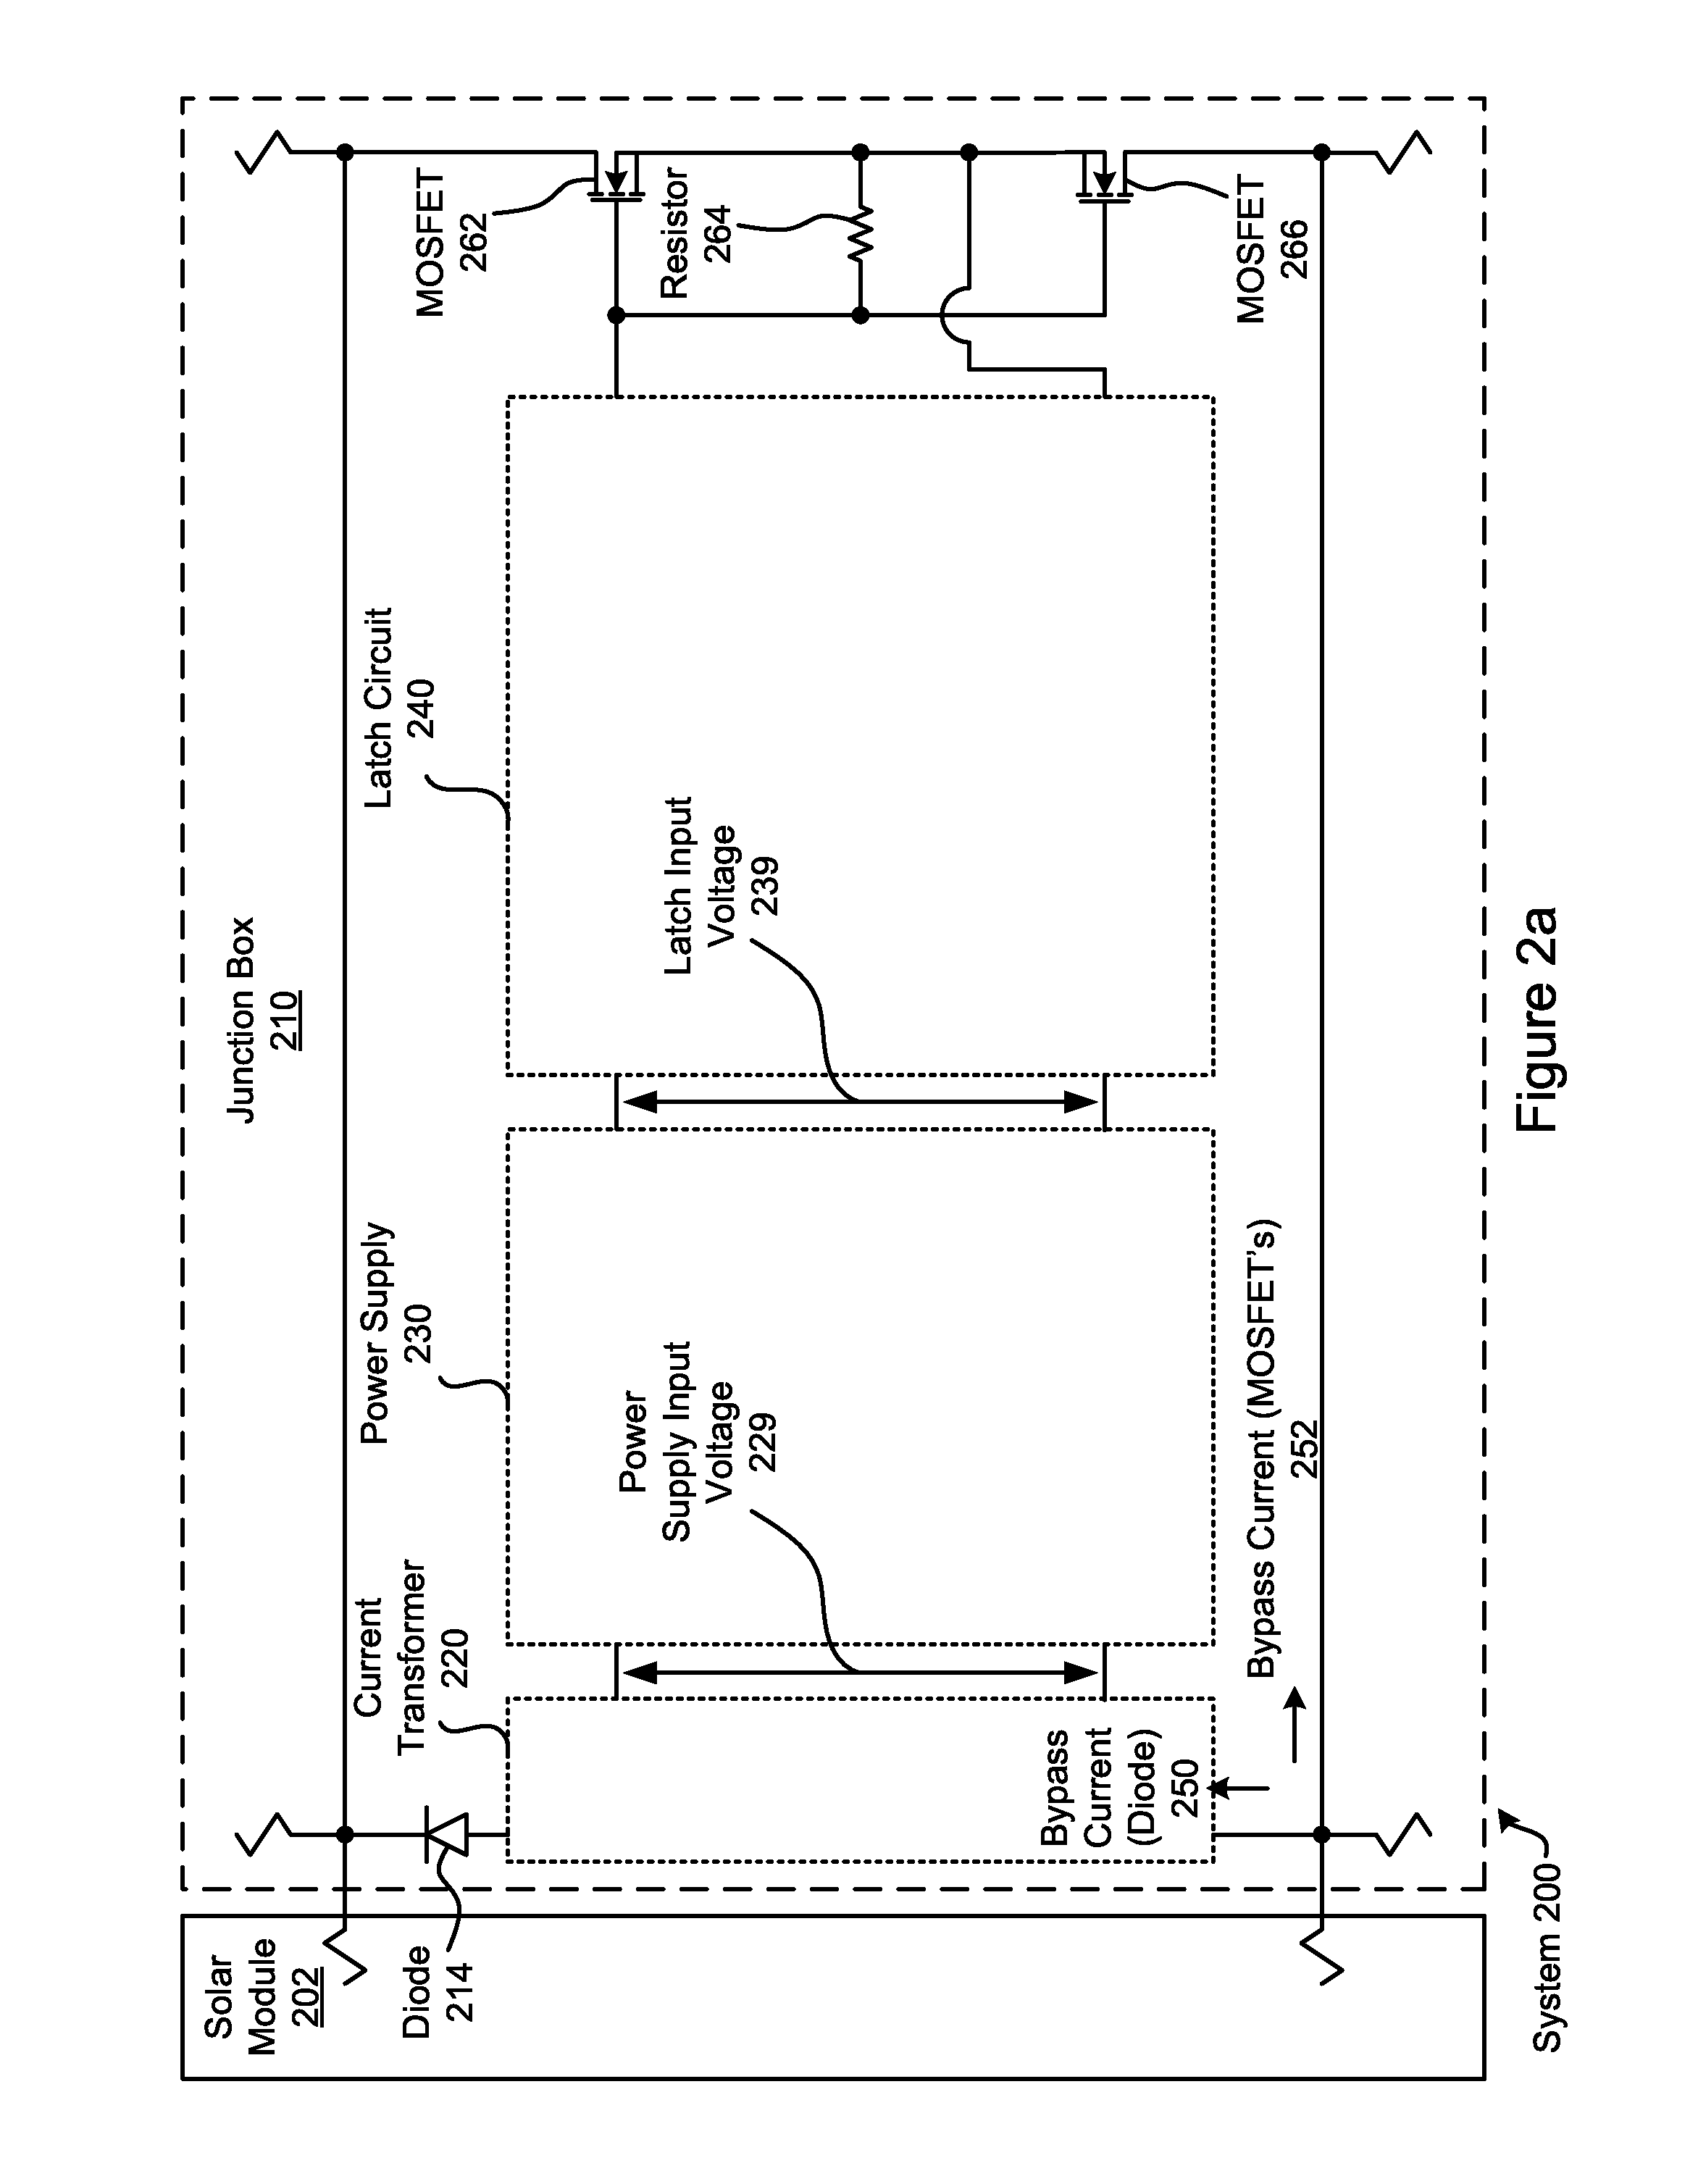 Systems and Methods to Provide Enhanced Diode Bypass Paths